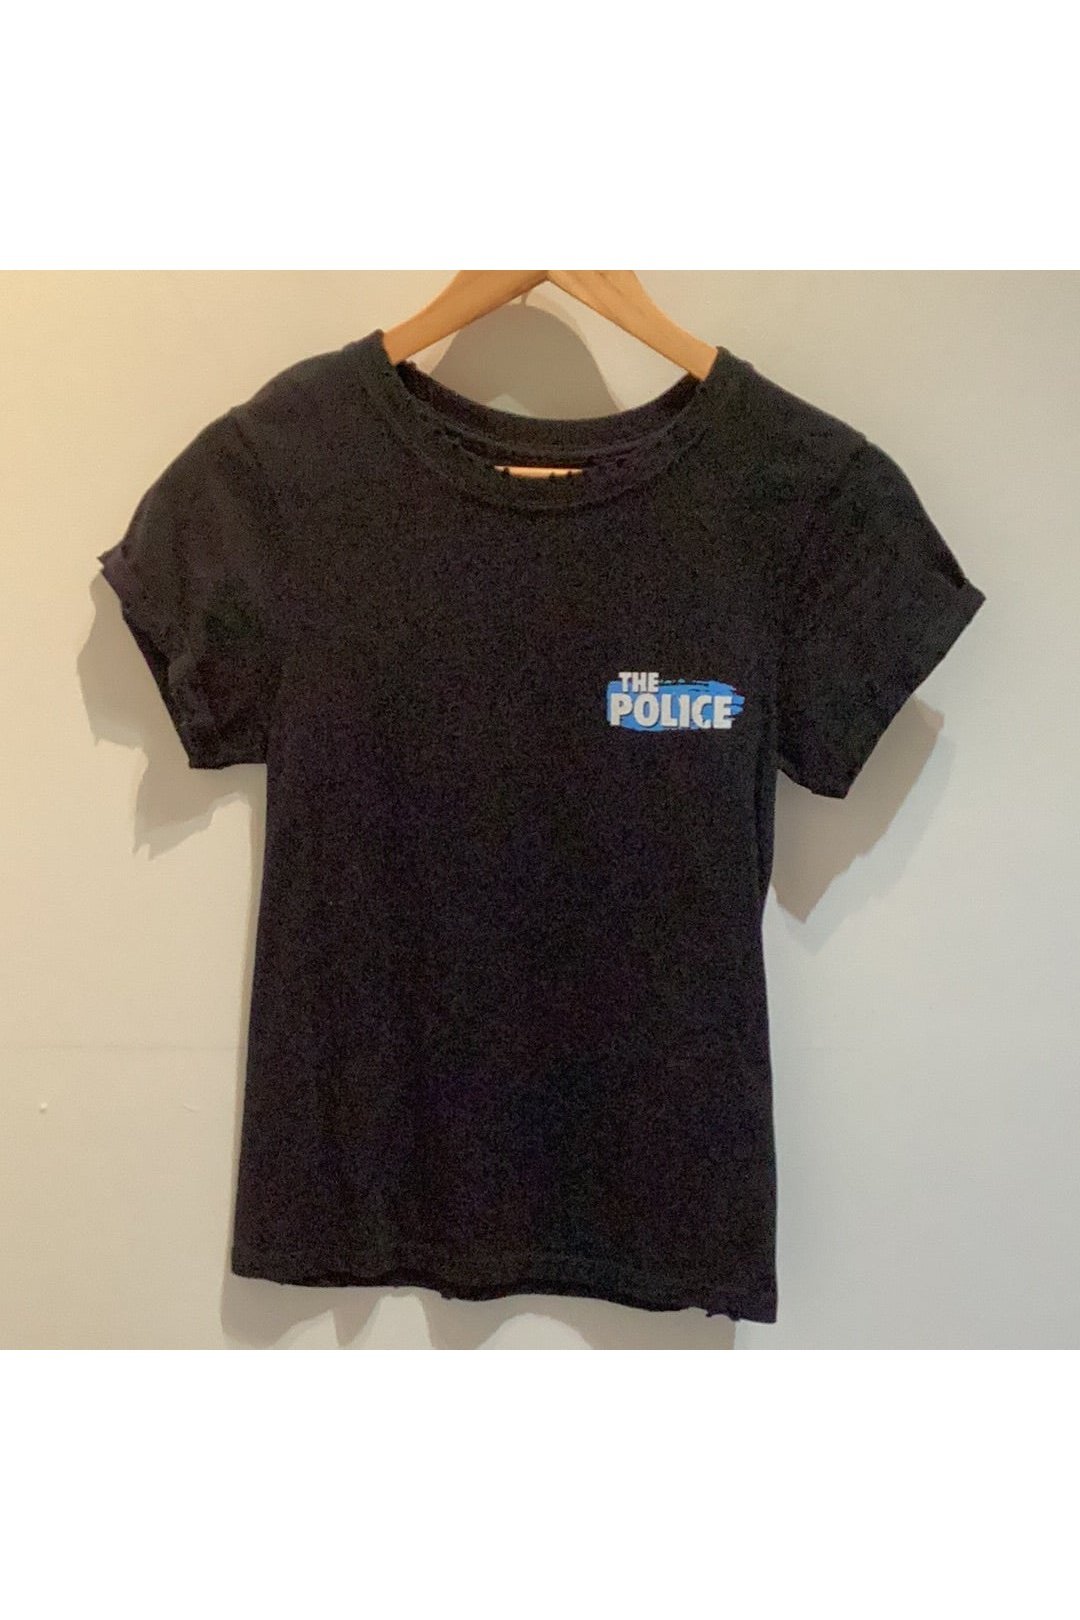 The Police Dont Stand Too Close Tee